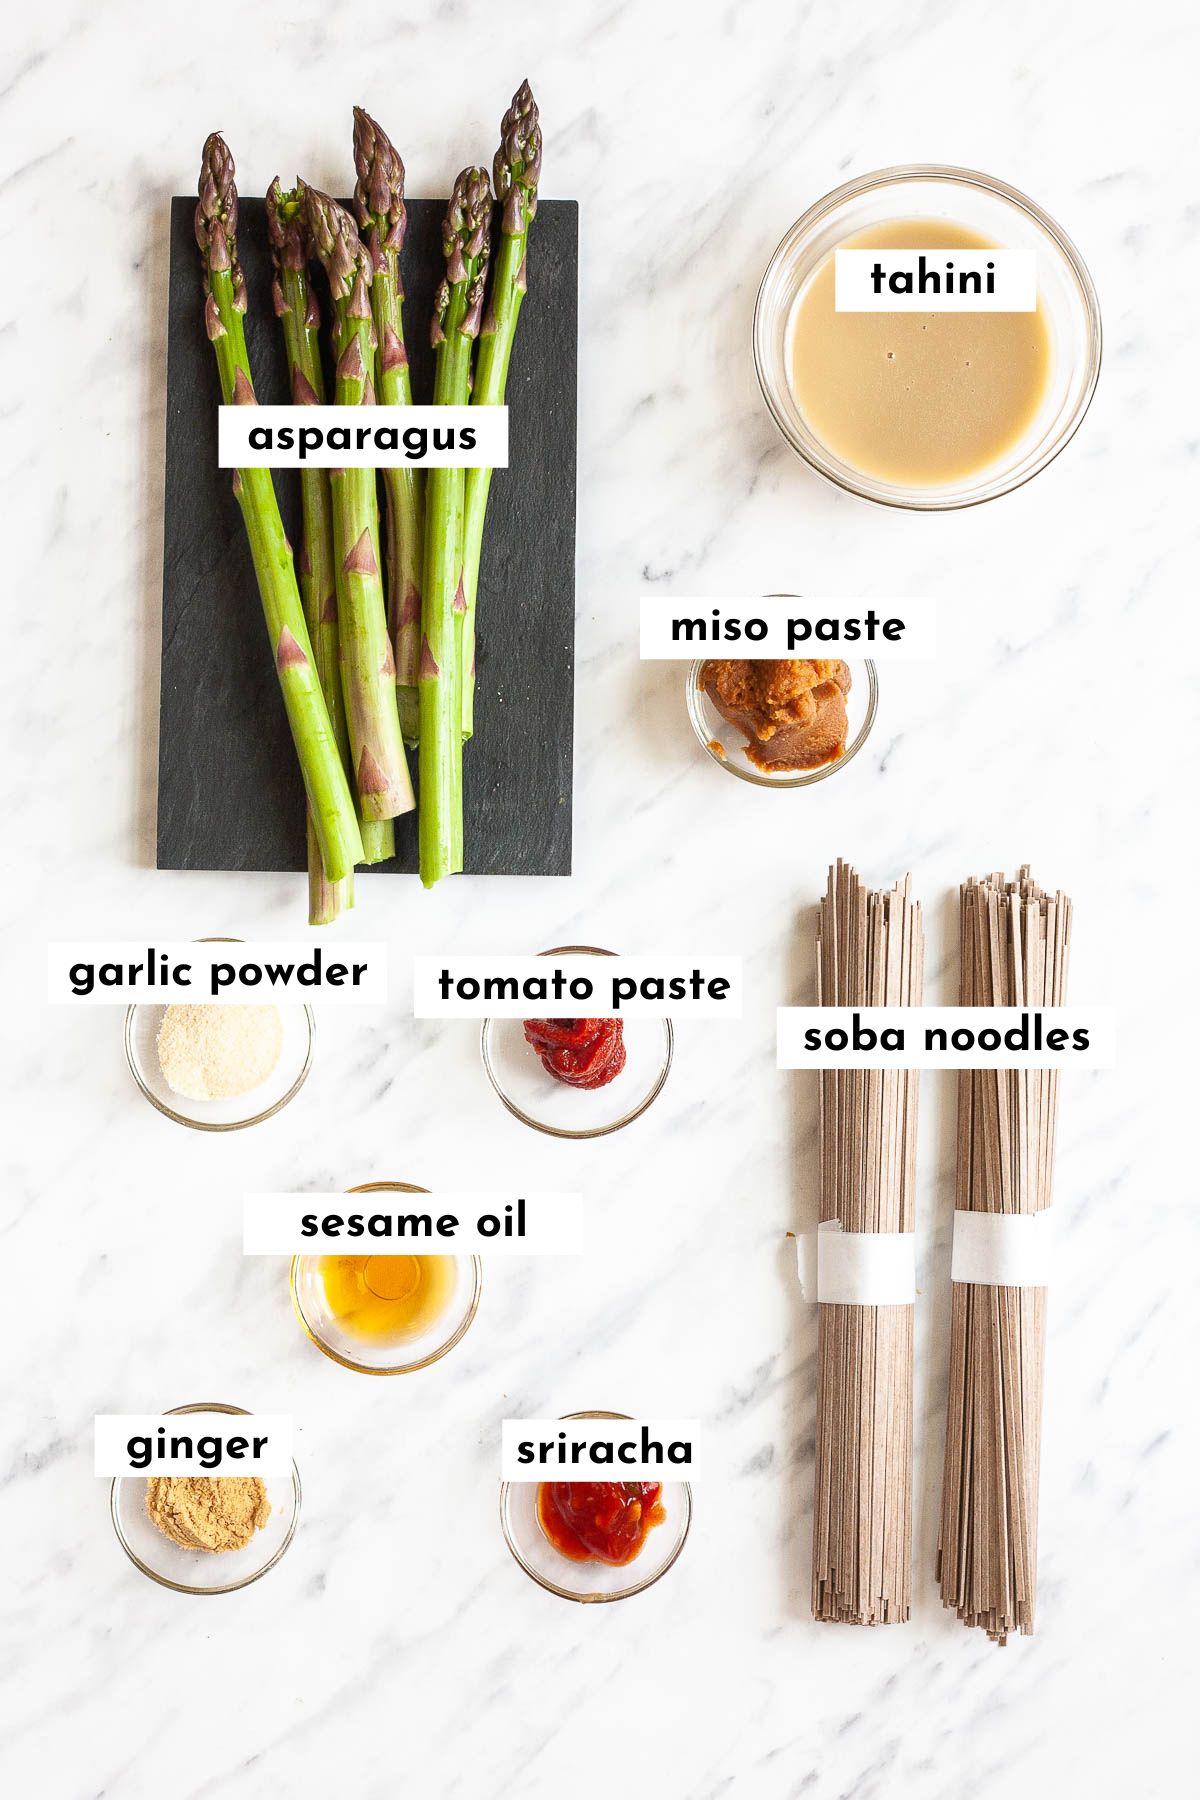 The ingredients of miso noodles is displayed including soba noodles, asparagus, and small glass bowls of miso paste, tahini, garlic powder, sesame oil, sriracha, tomato paste and ginger powder